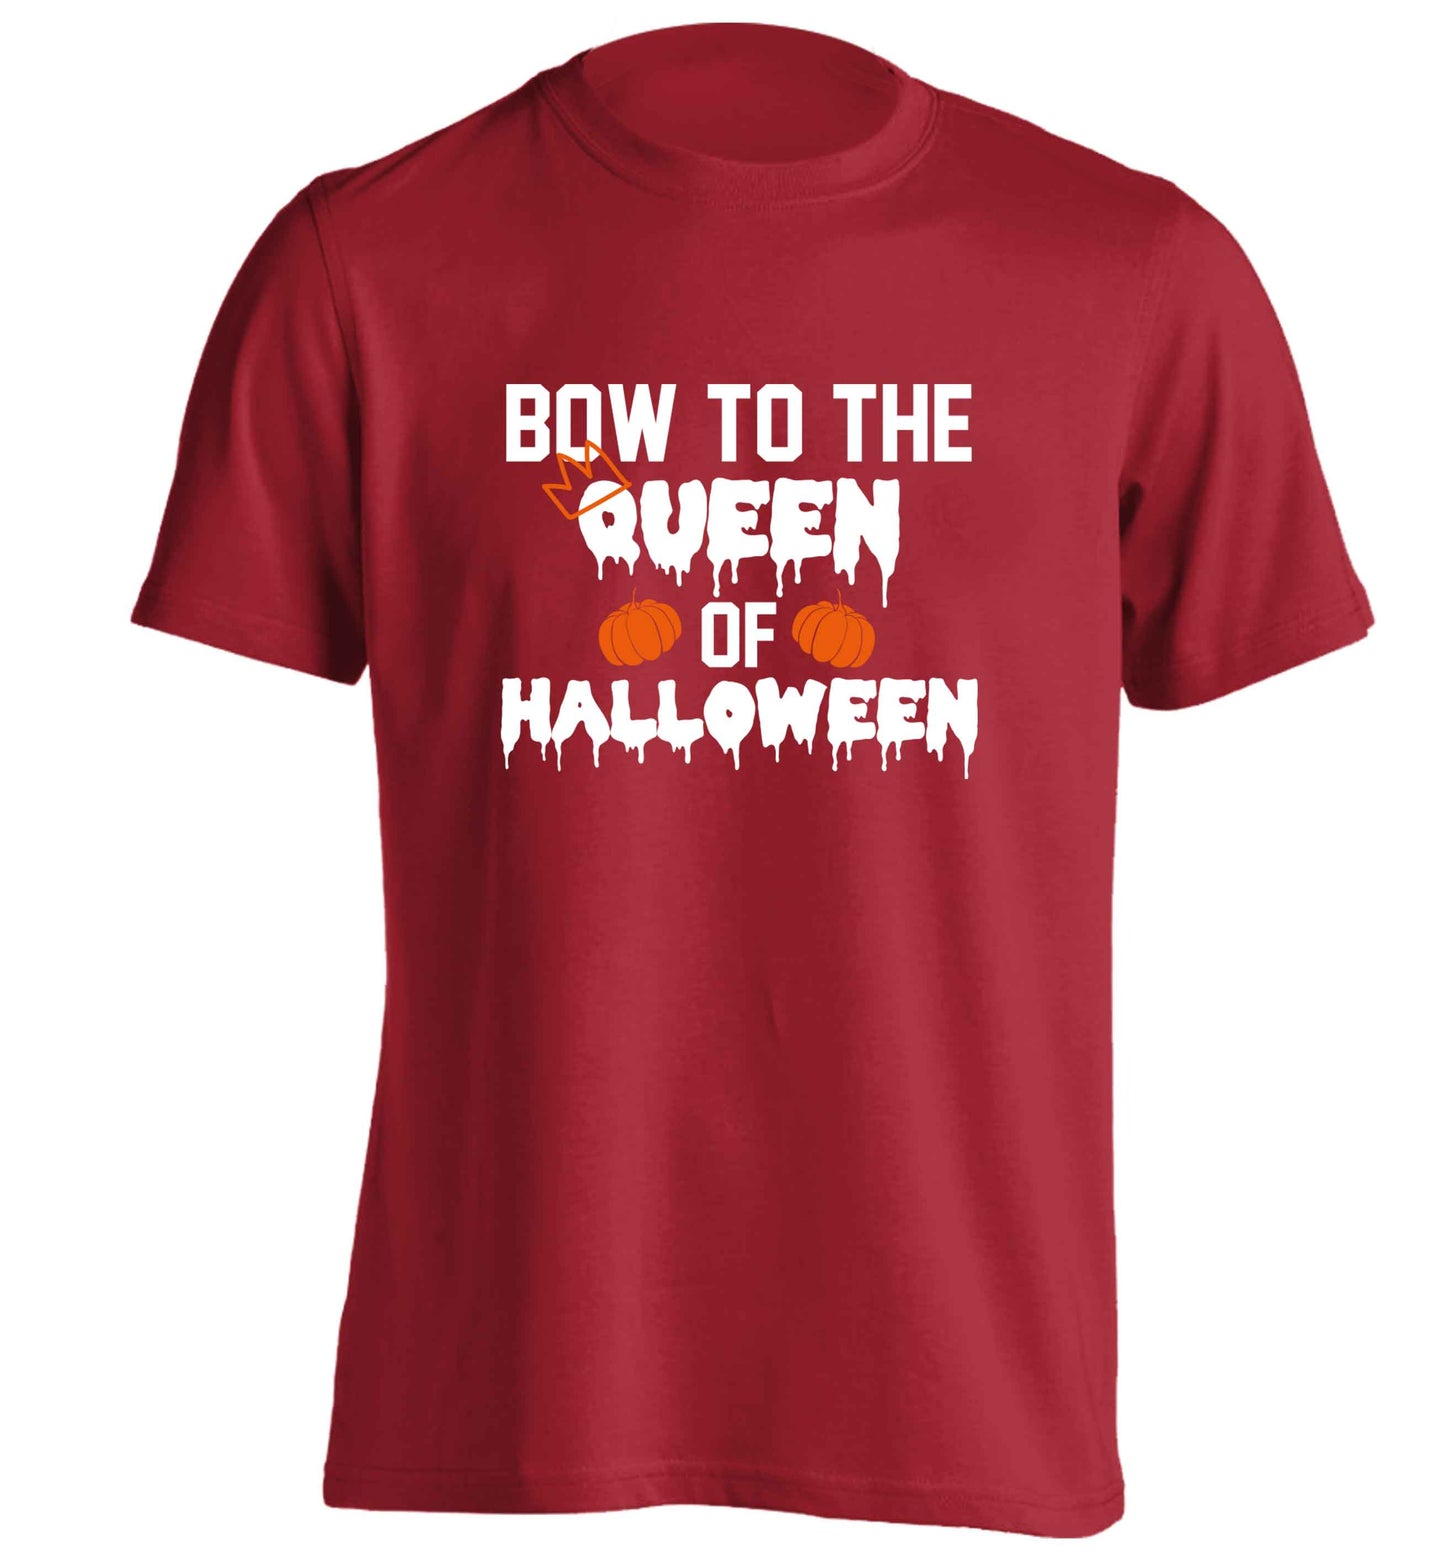 Bow to the Queen of halloween adults unisex red Tshirt 2XL